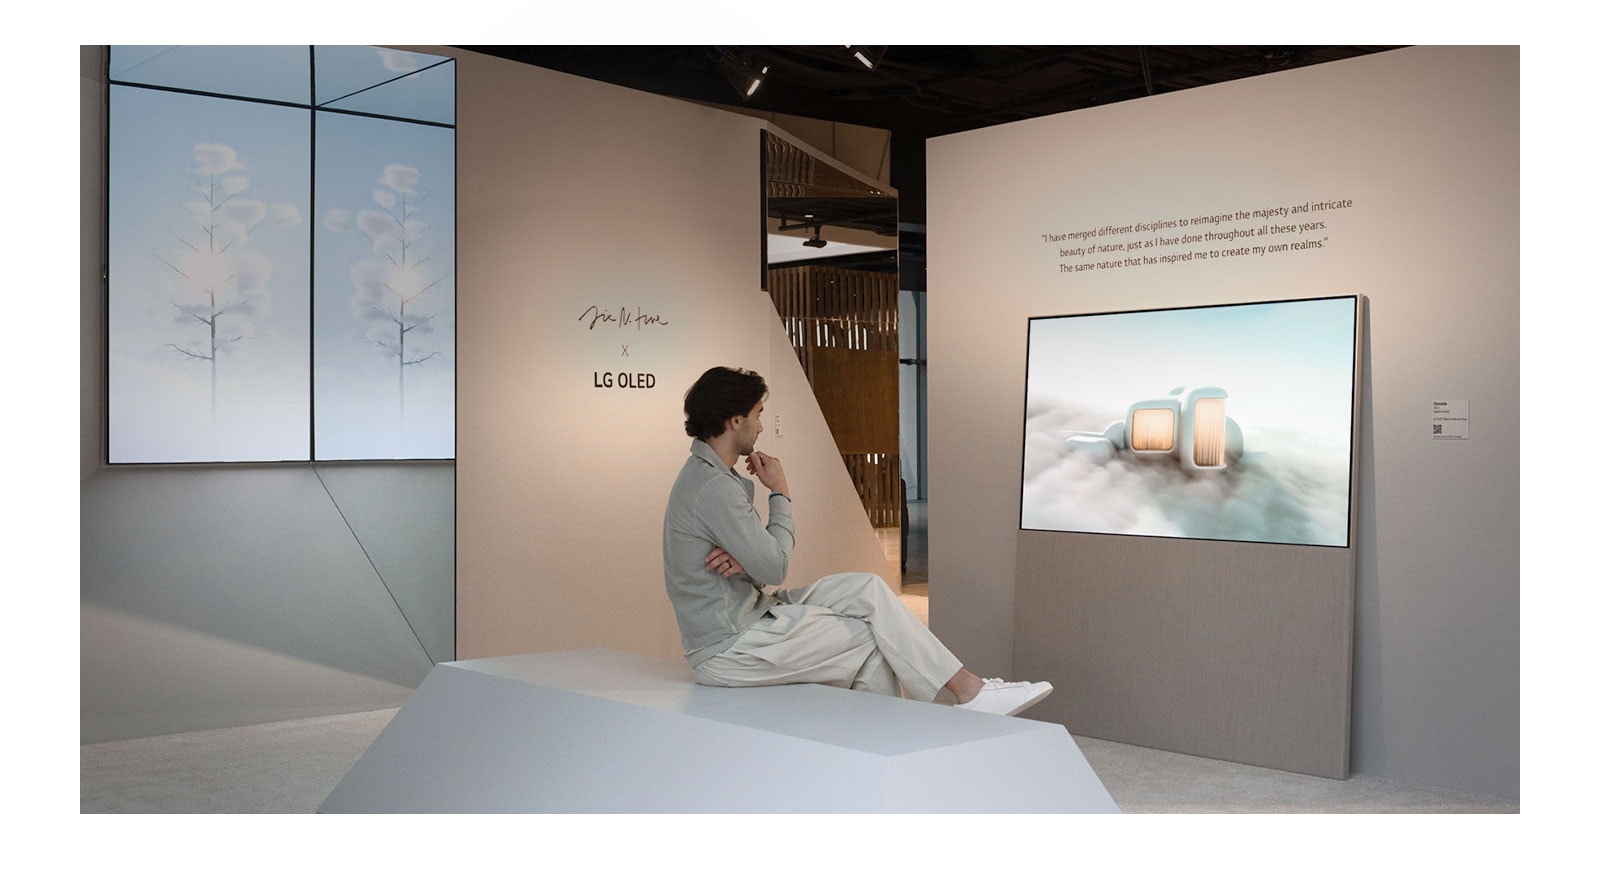 The image shows a person sitting on a chair looking at dreamlike scenery set among the clouds playing on Easel. On another wall, an LG OLED display shows an image of snow-covered trees reaching into the sky.